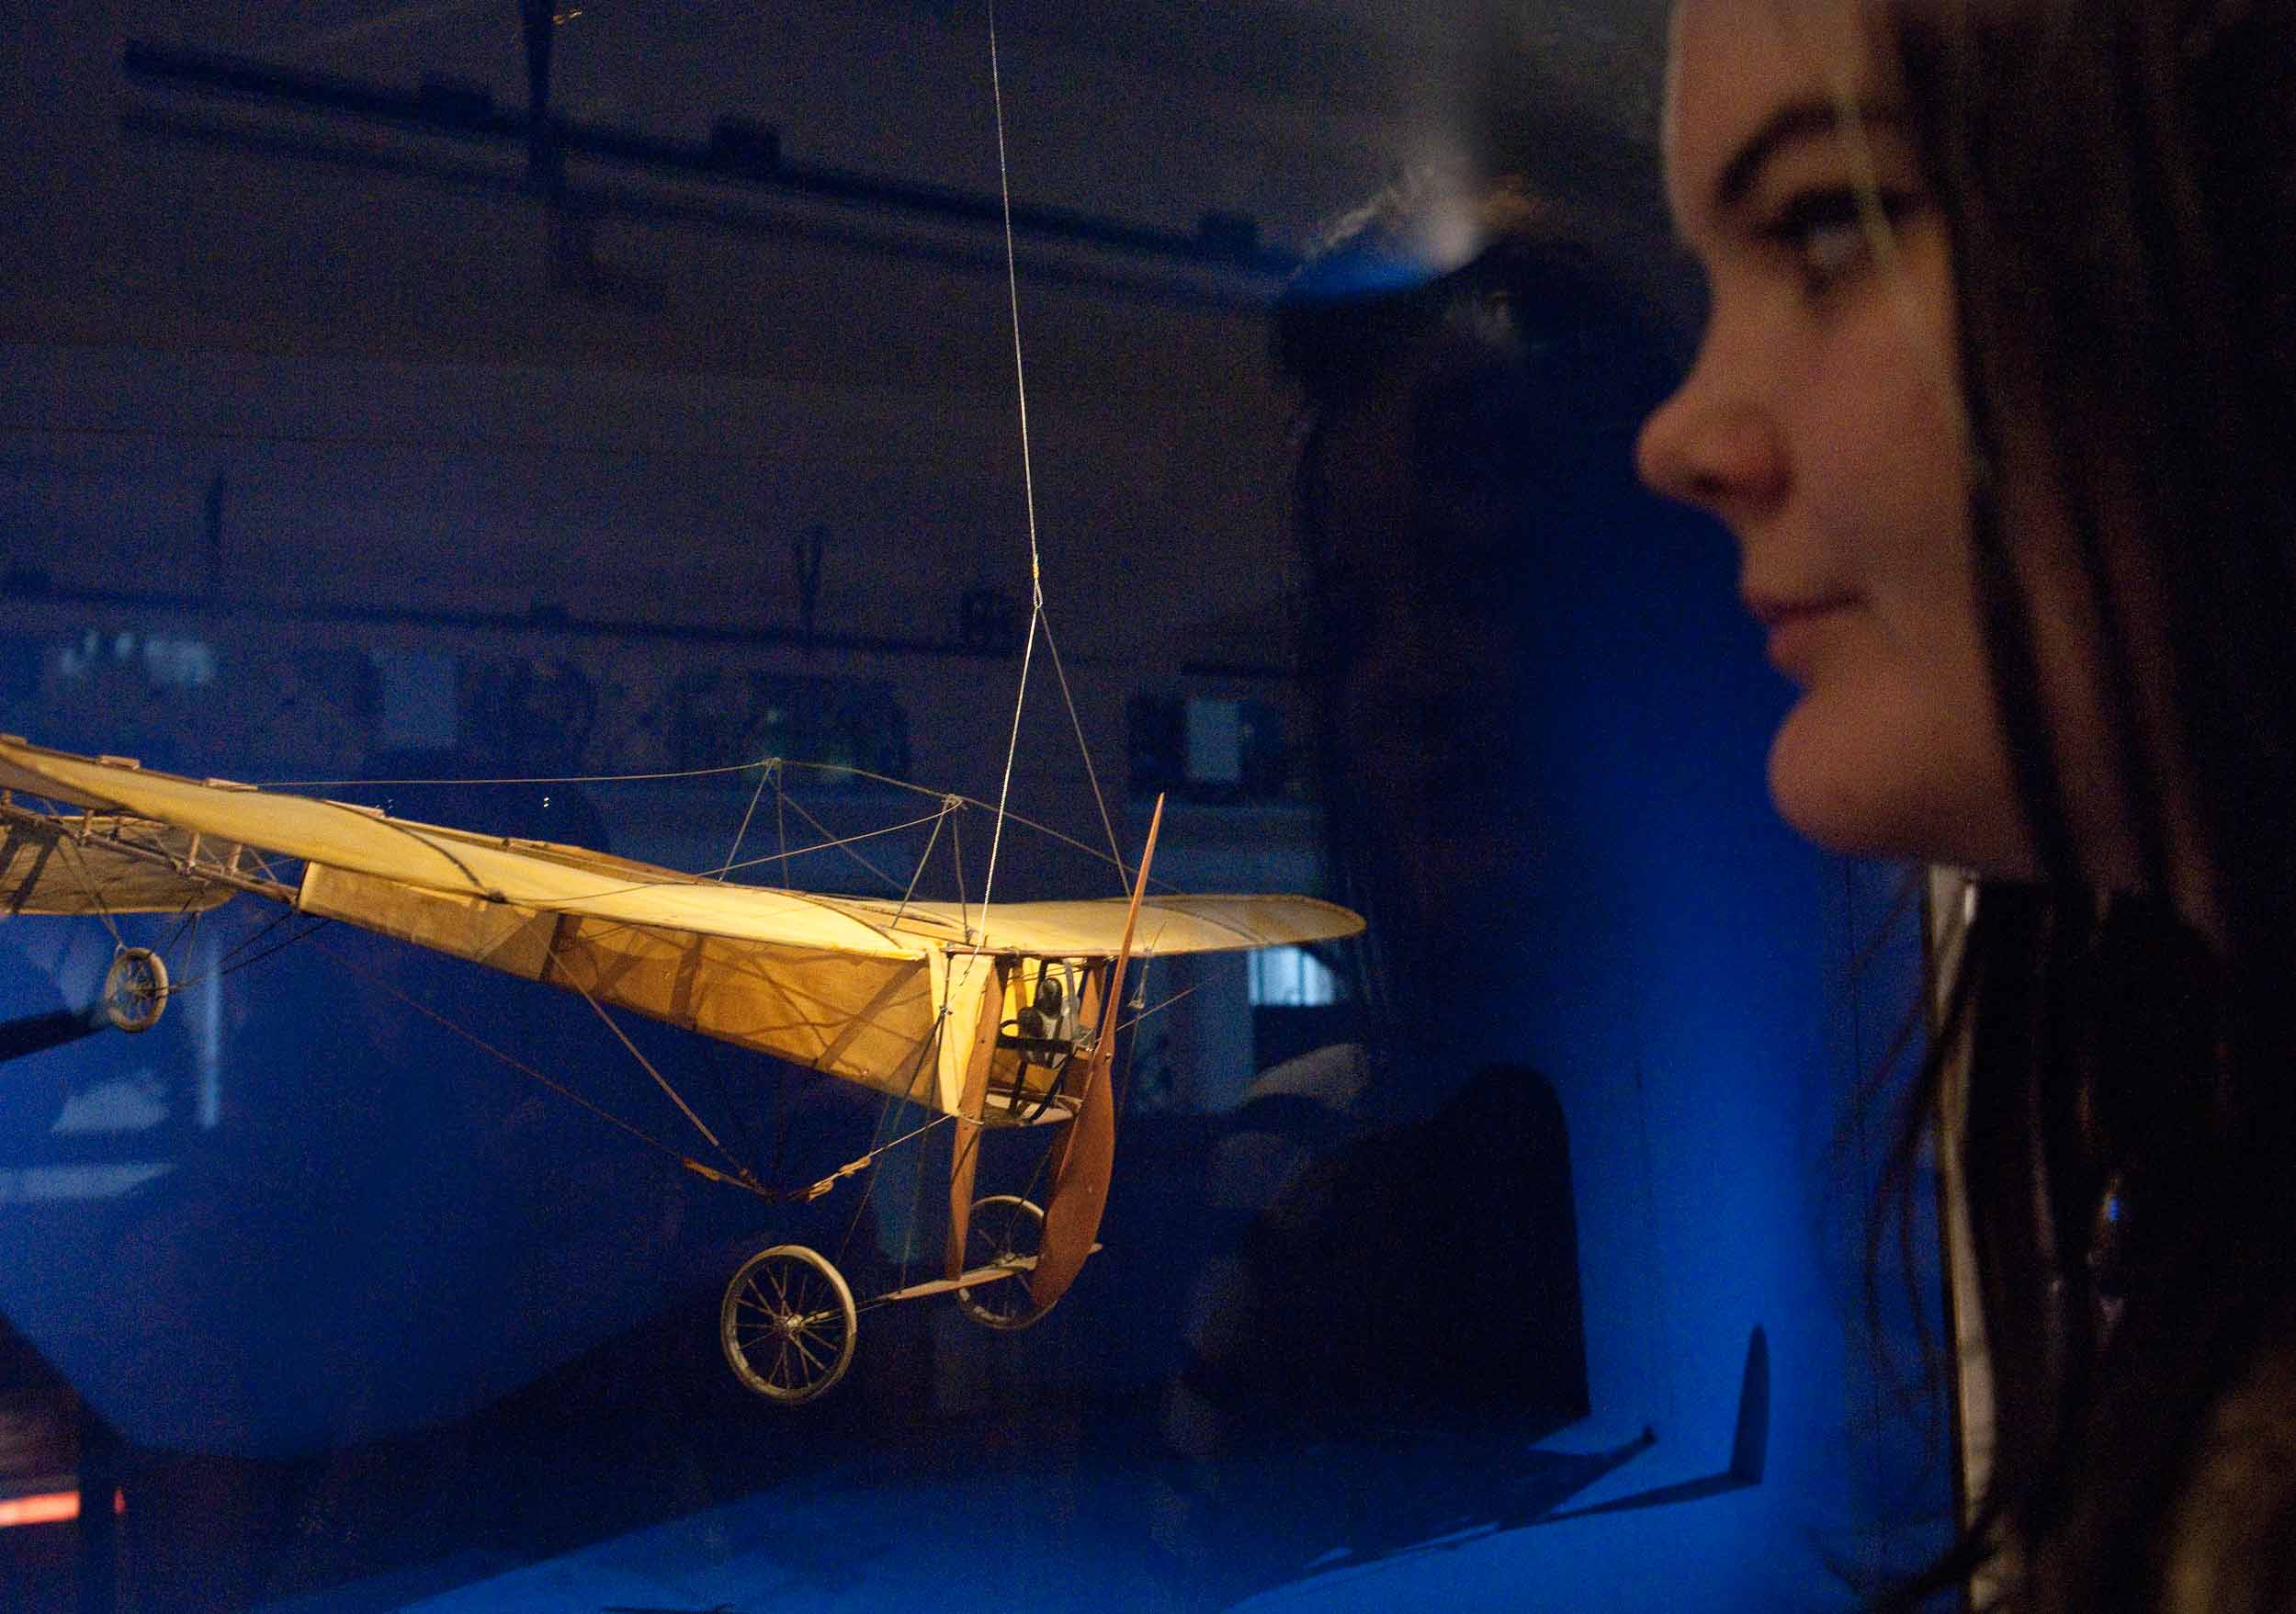 A guest peers at a model Bleriot plane in the exhibition. Image credit: Science Museum